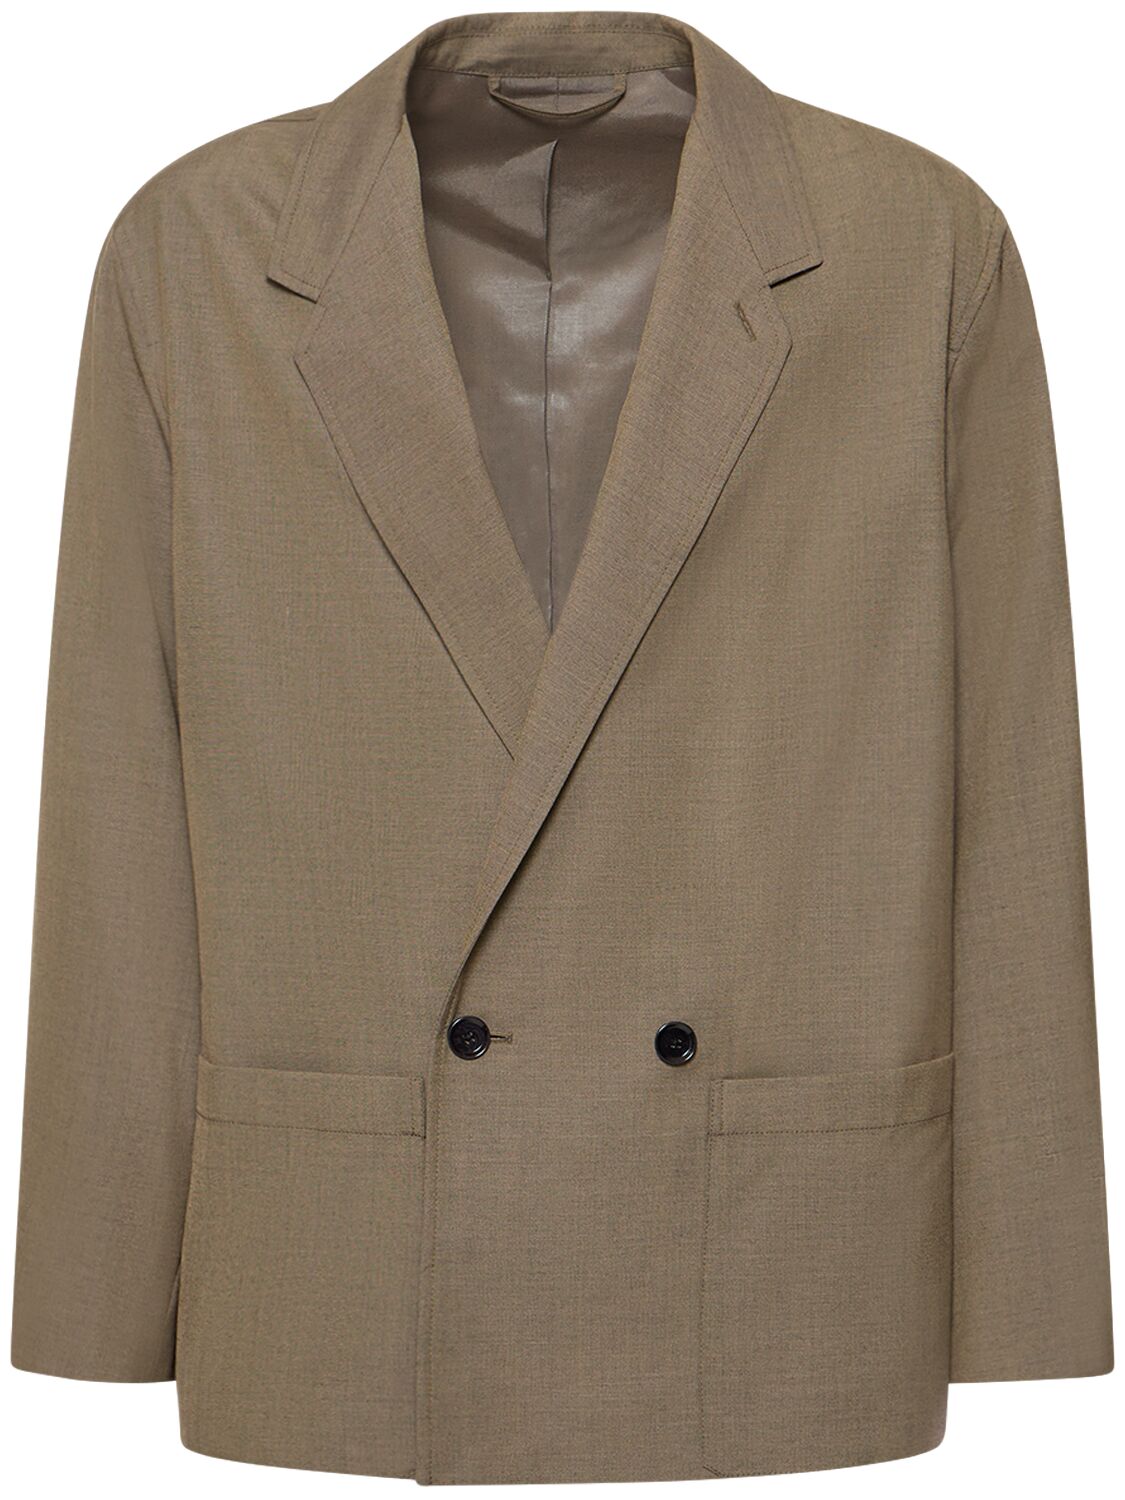 LEMAIRE Double Breasted Wool Blend Jacket